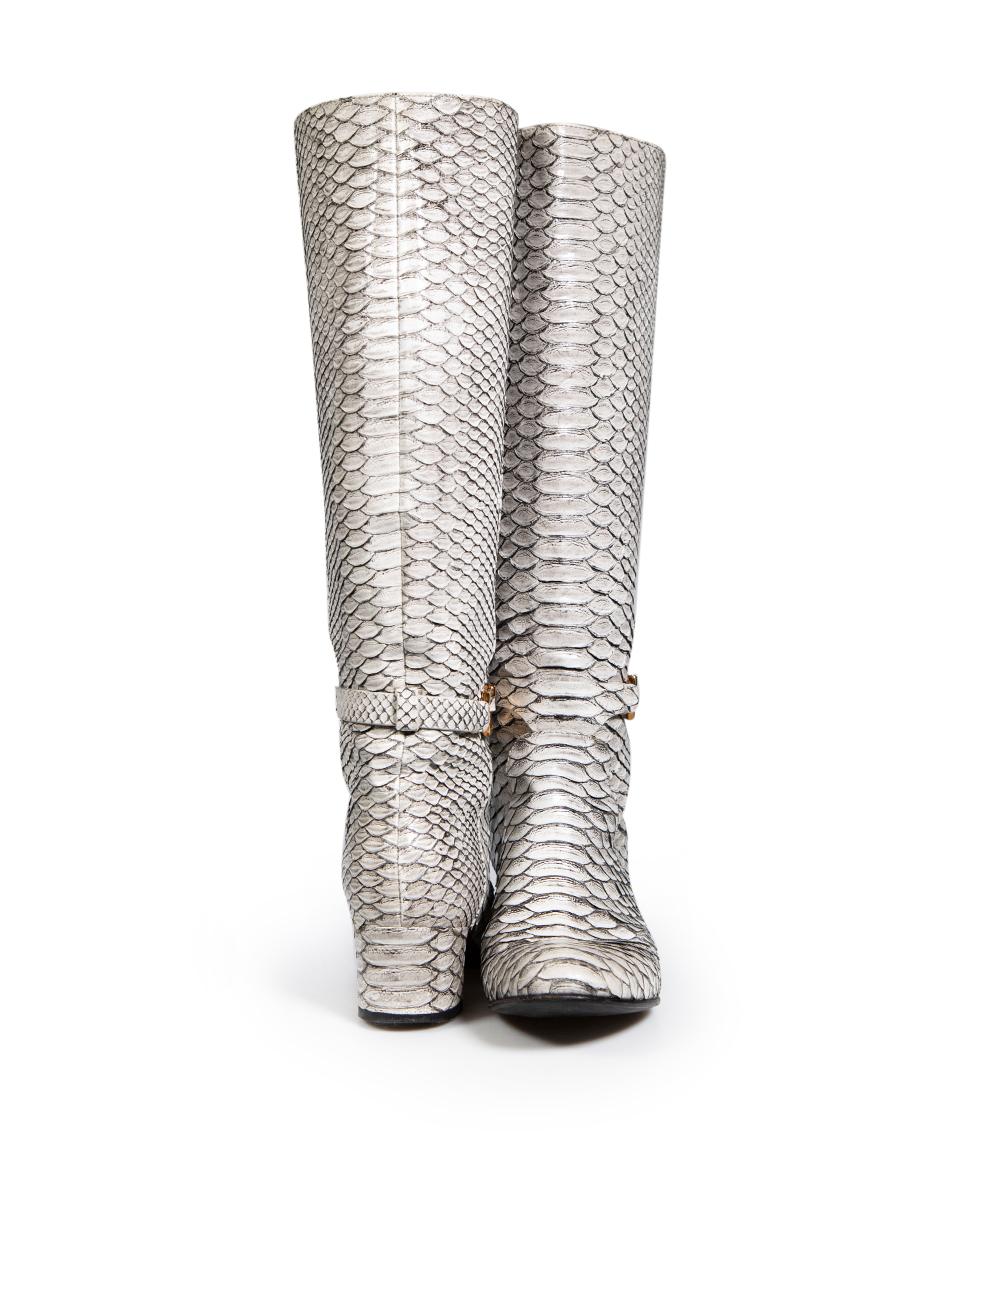 Sergio Rossi Grey Python Knee High Boots Size IT 37 In Good Condition For Sale In London, GB